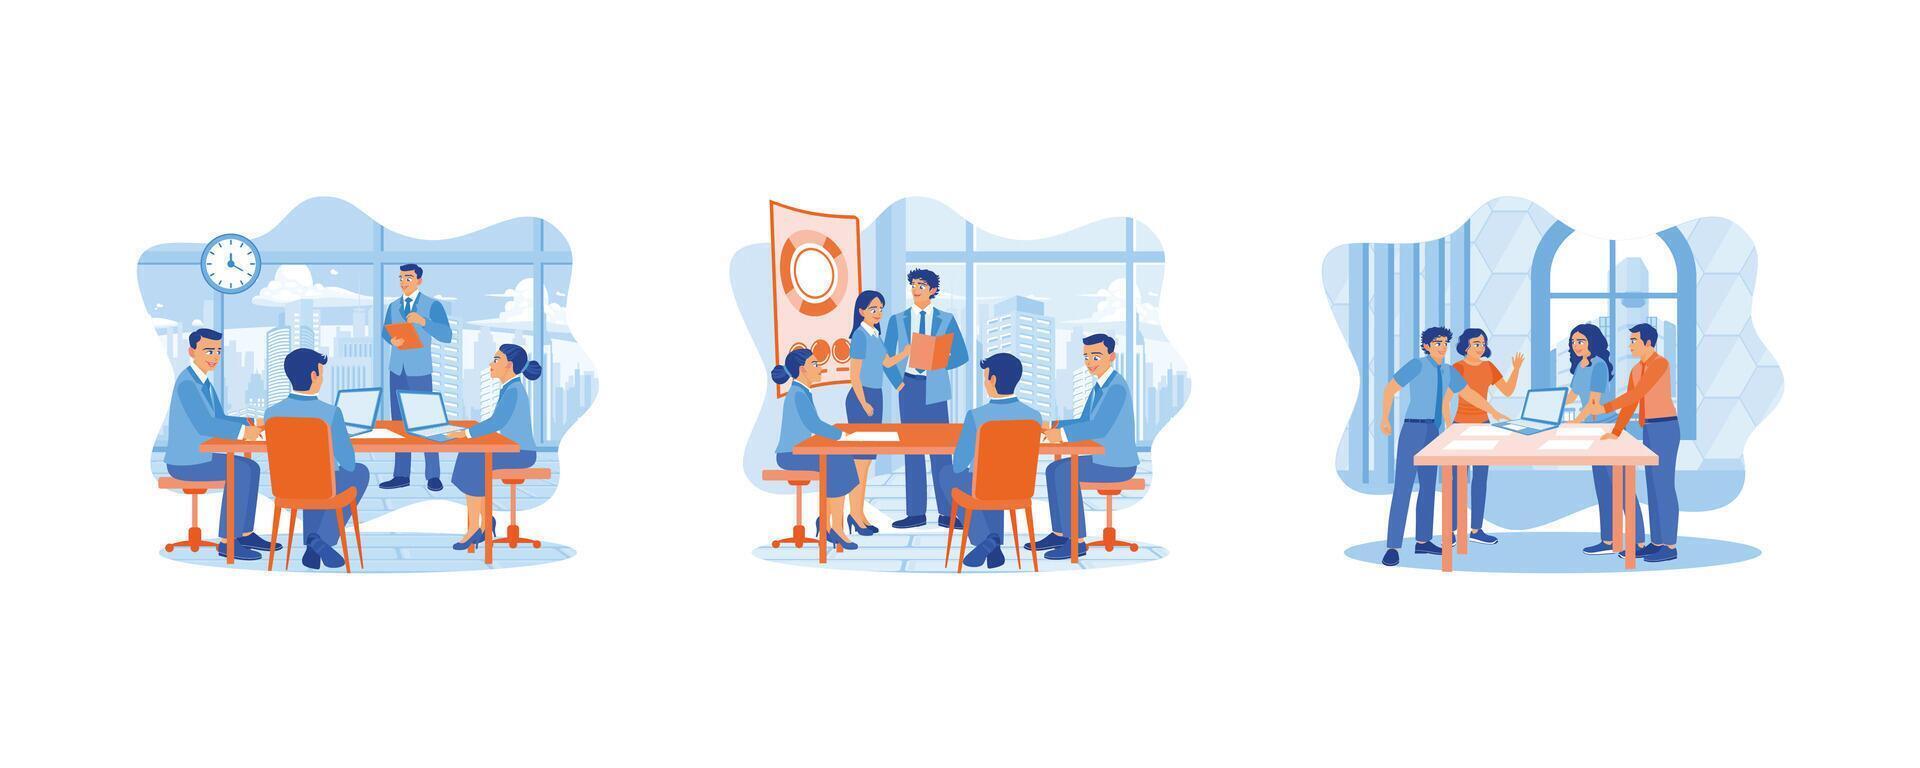 Business people in office workplace. CEO and business team holding presentation in the meeting room. Diverse coworkers discuss and plan work projects in the office. set flat vector illustration.